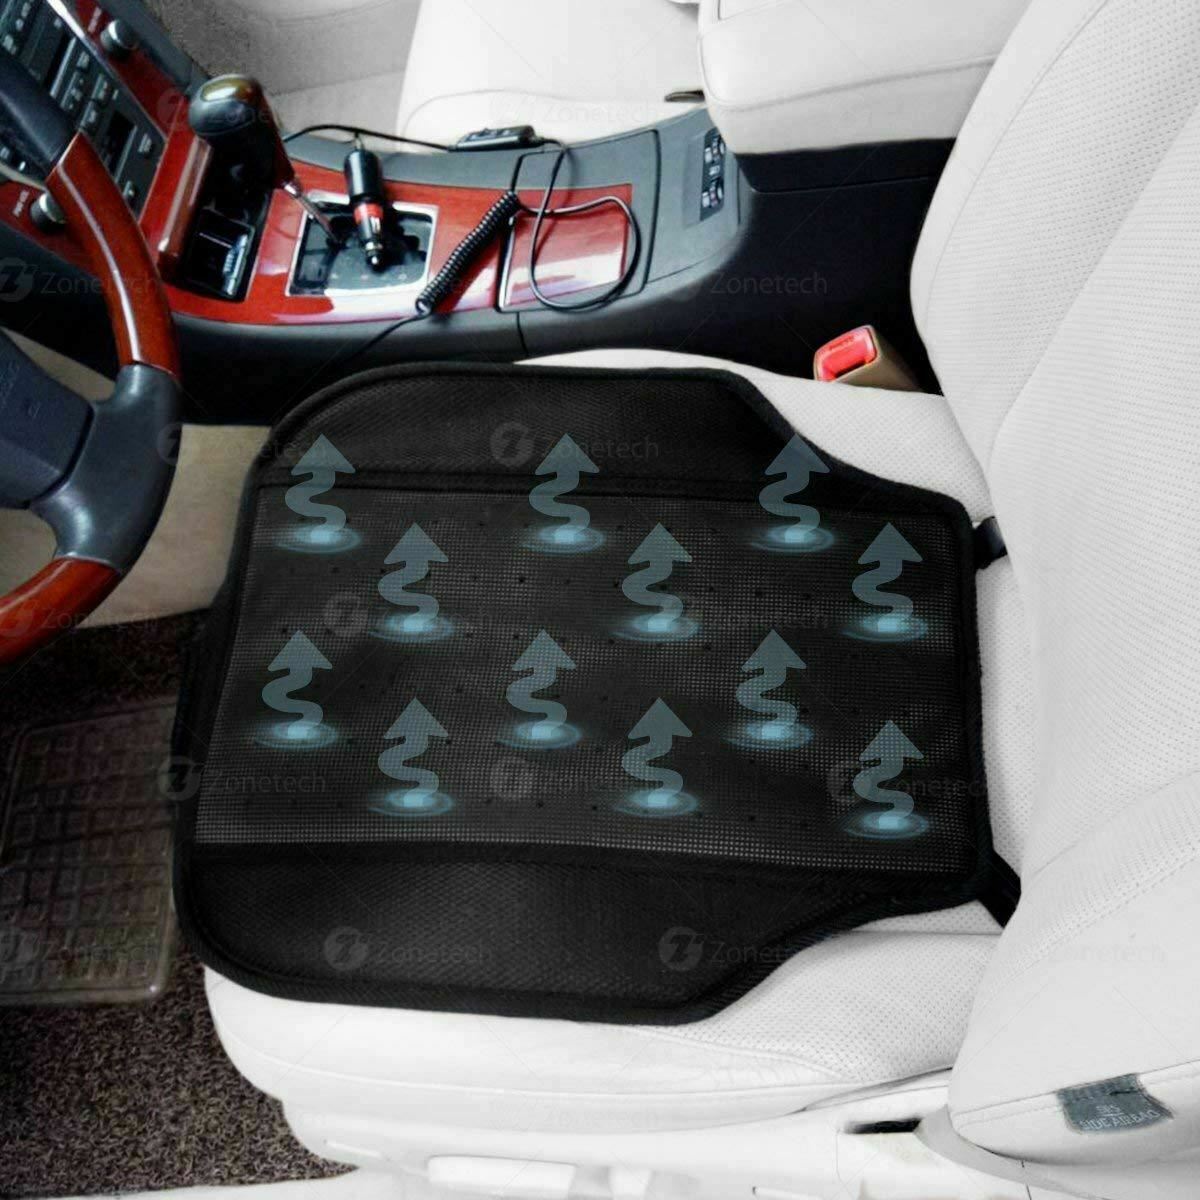 Car Vehicle Pad Cover Summer Cooling Seat Cushion